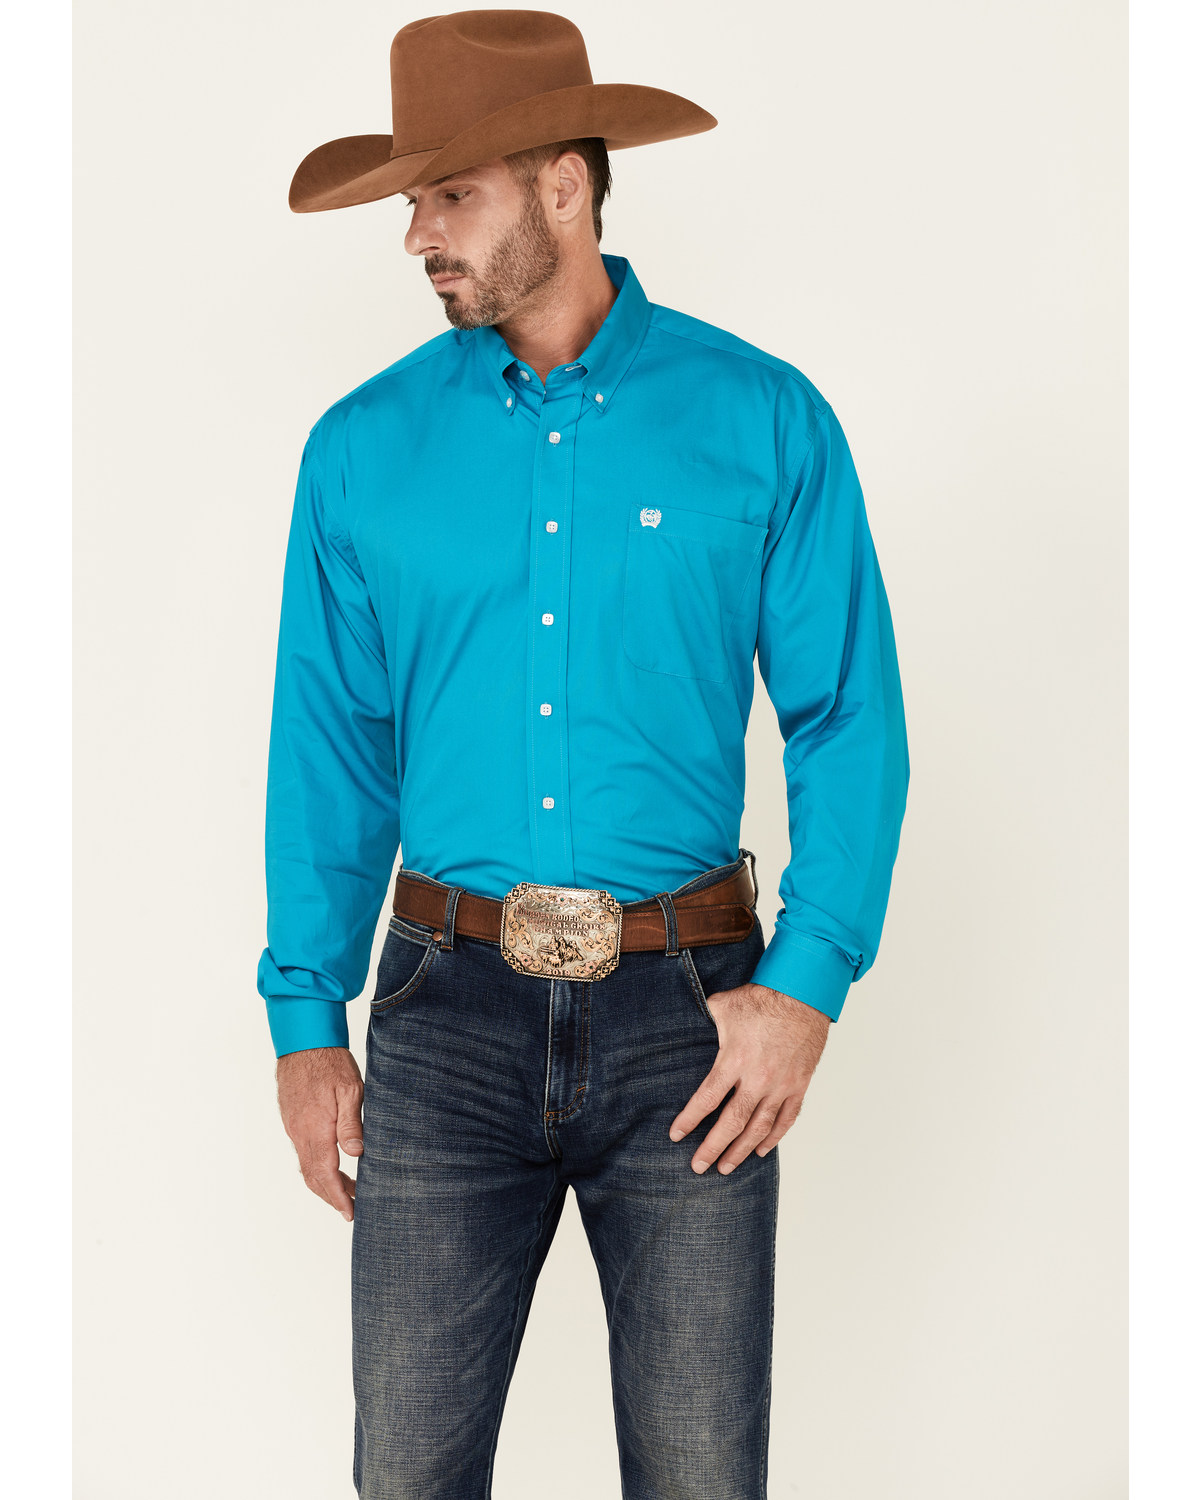 Cinch Men's Solid Turquoise Button-Down ...